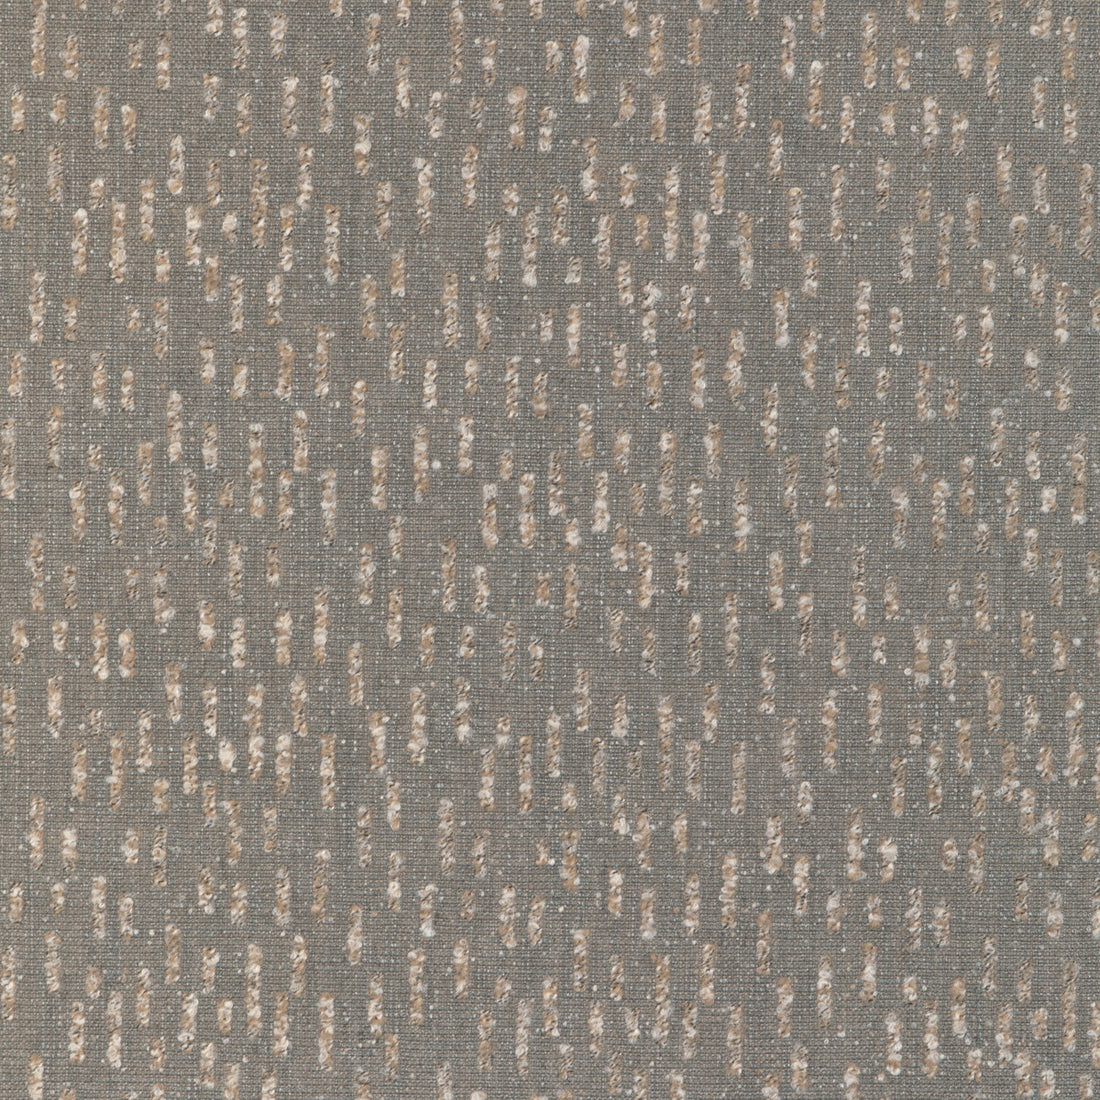 Slew fabric in mineral color - pattern GWF-3794.52.0 - by Lee Jofa Modern in the Kelly Wearstler VIII collection